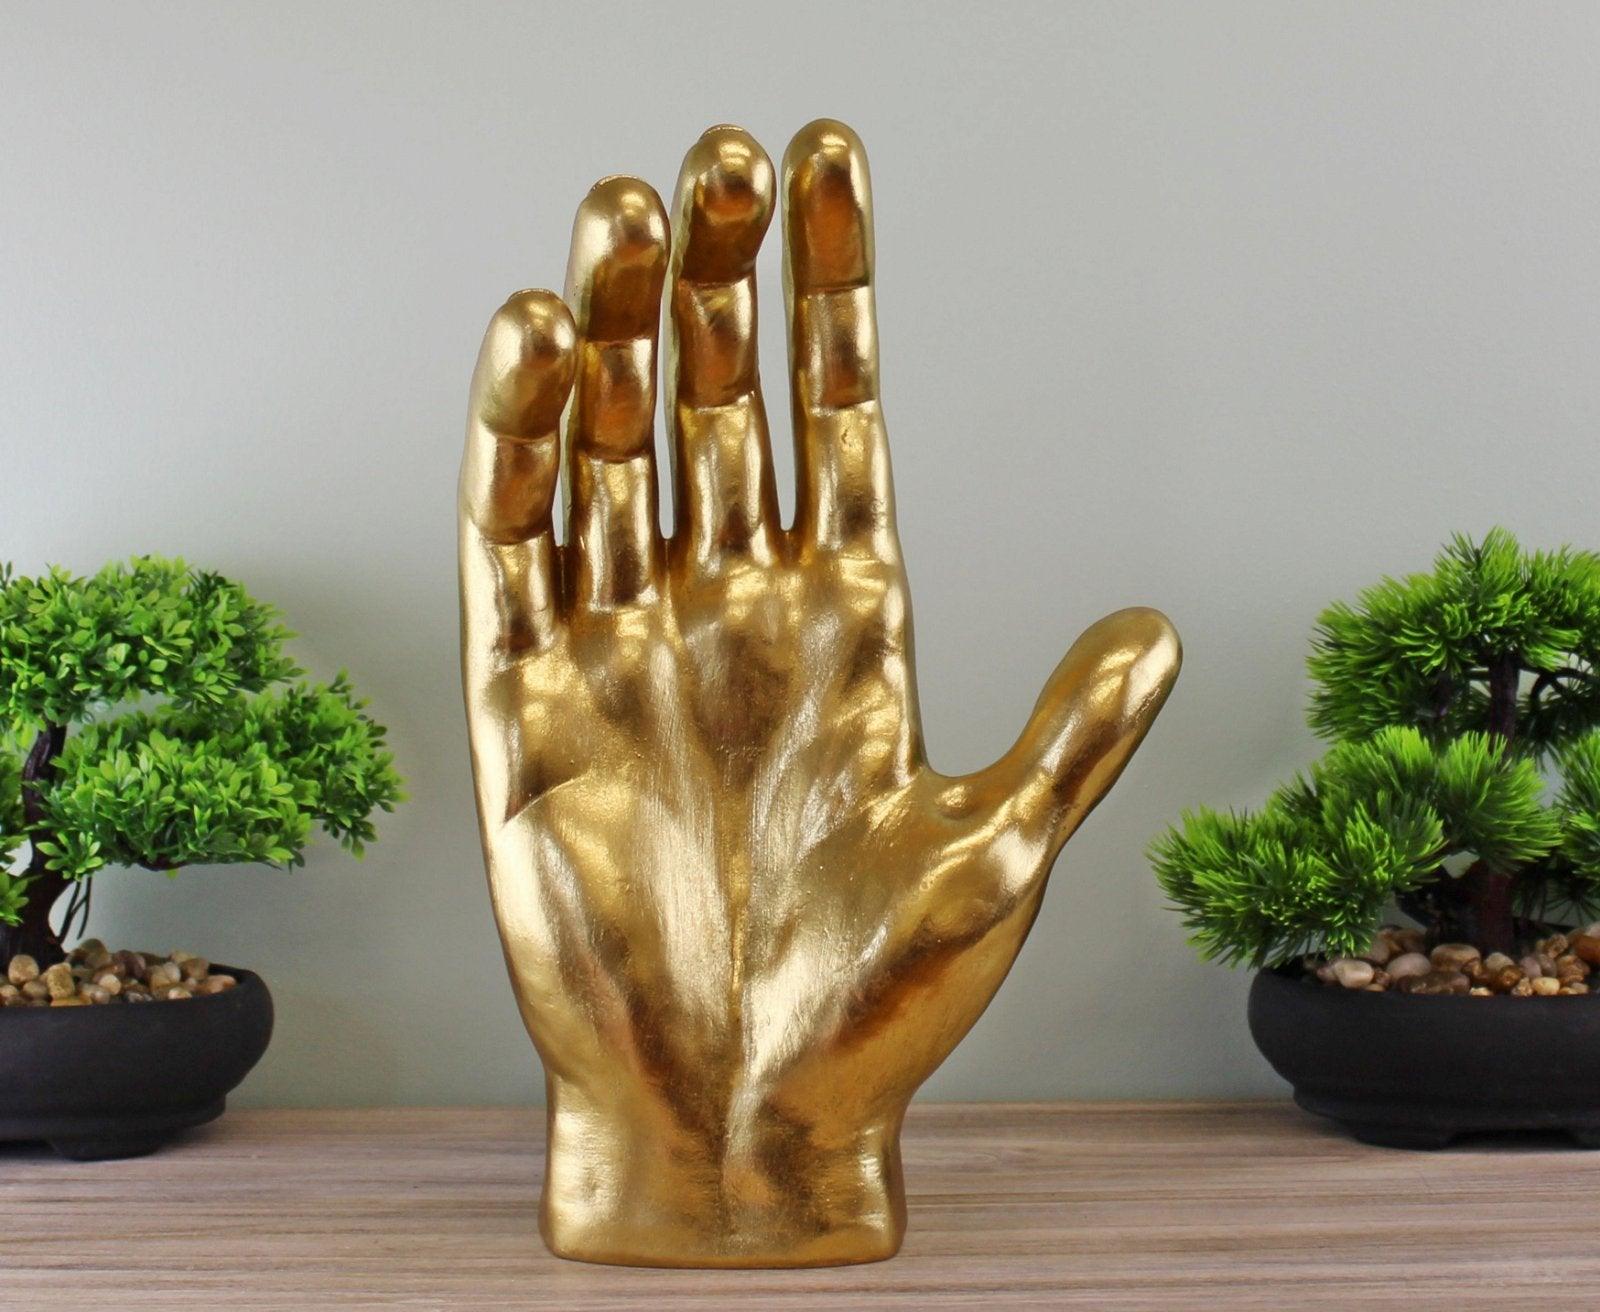 Large Gold Decorative Hand Ornament-Figurines & Statues